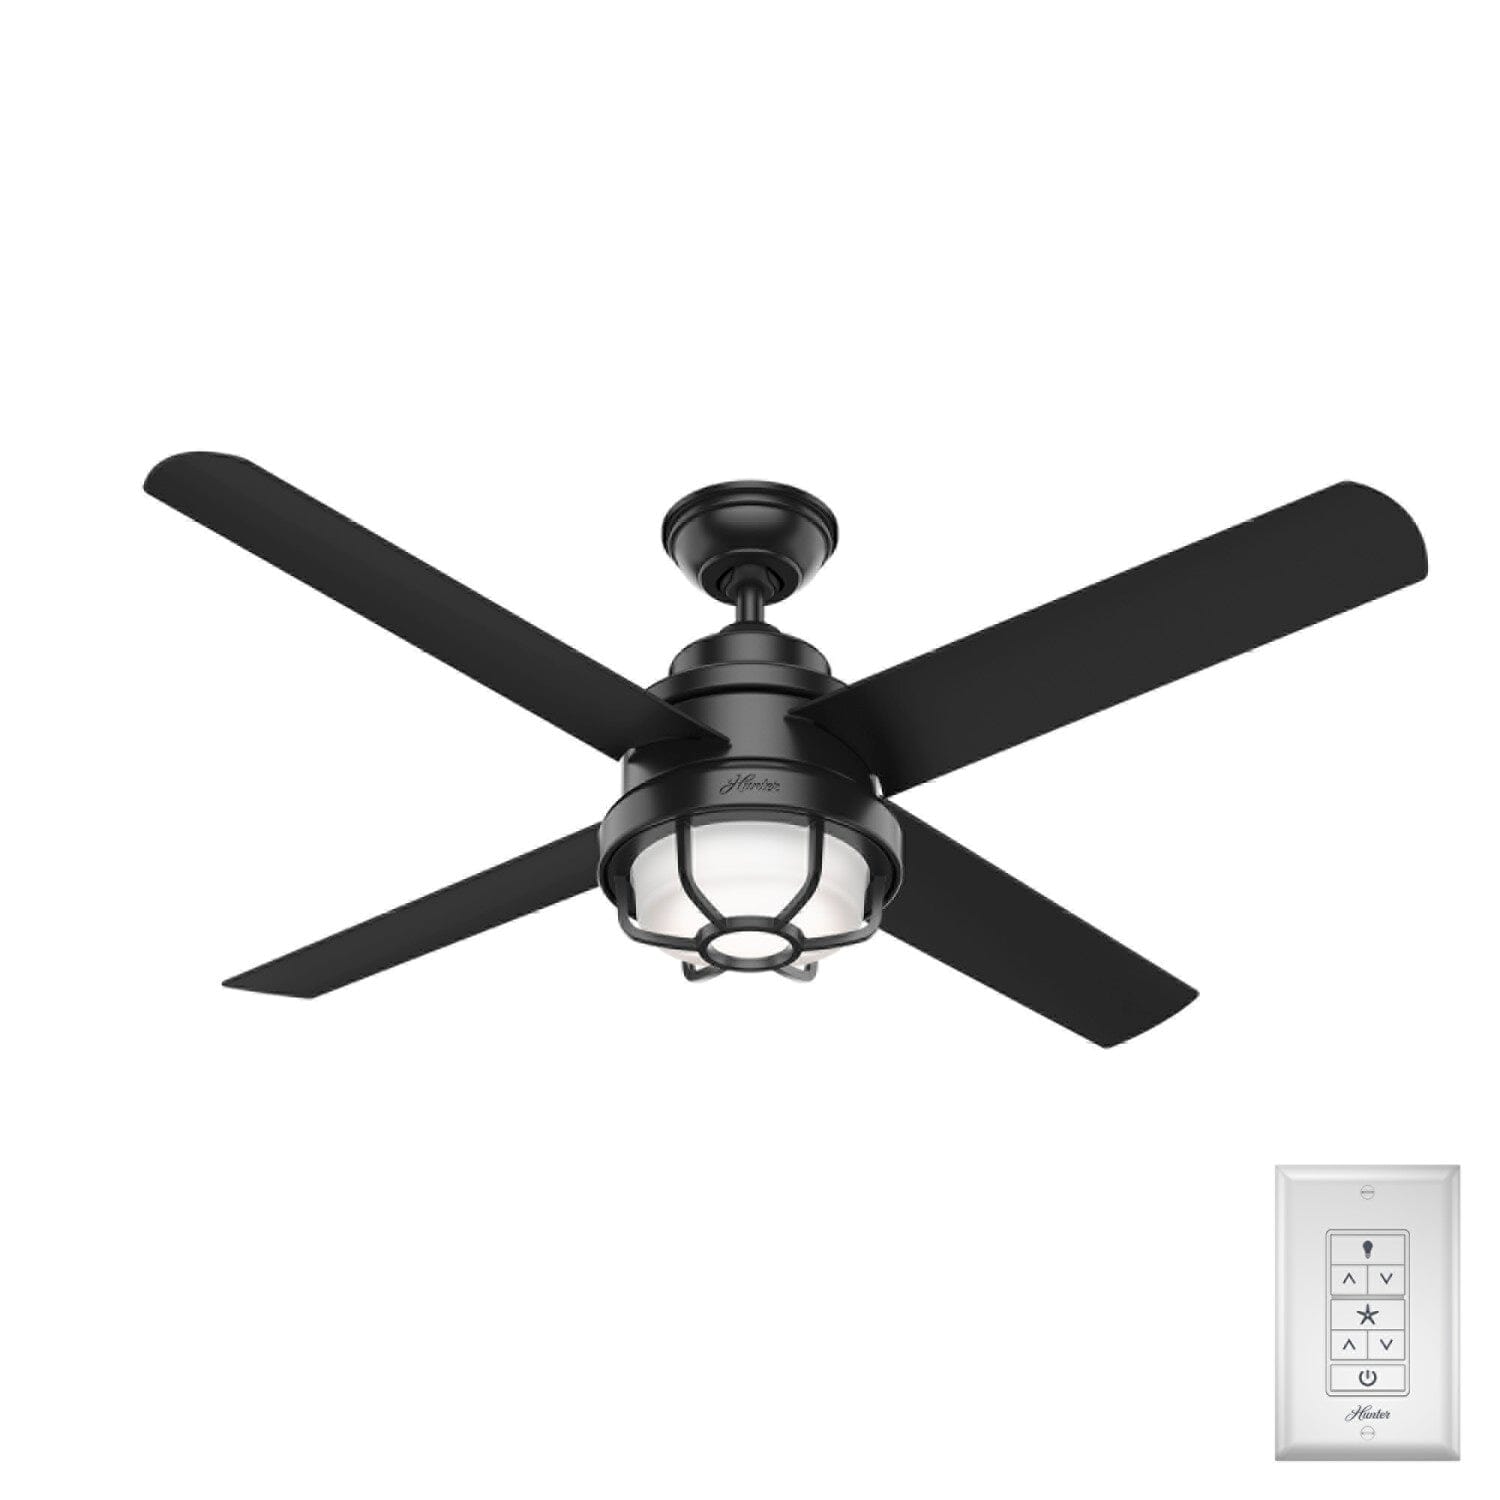 Searow Outdoor With Led Light 54 Inch Ceiling Fan Hunter